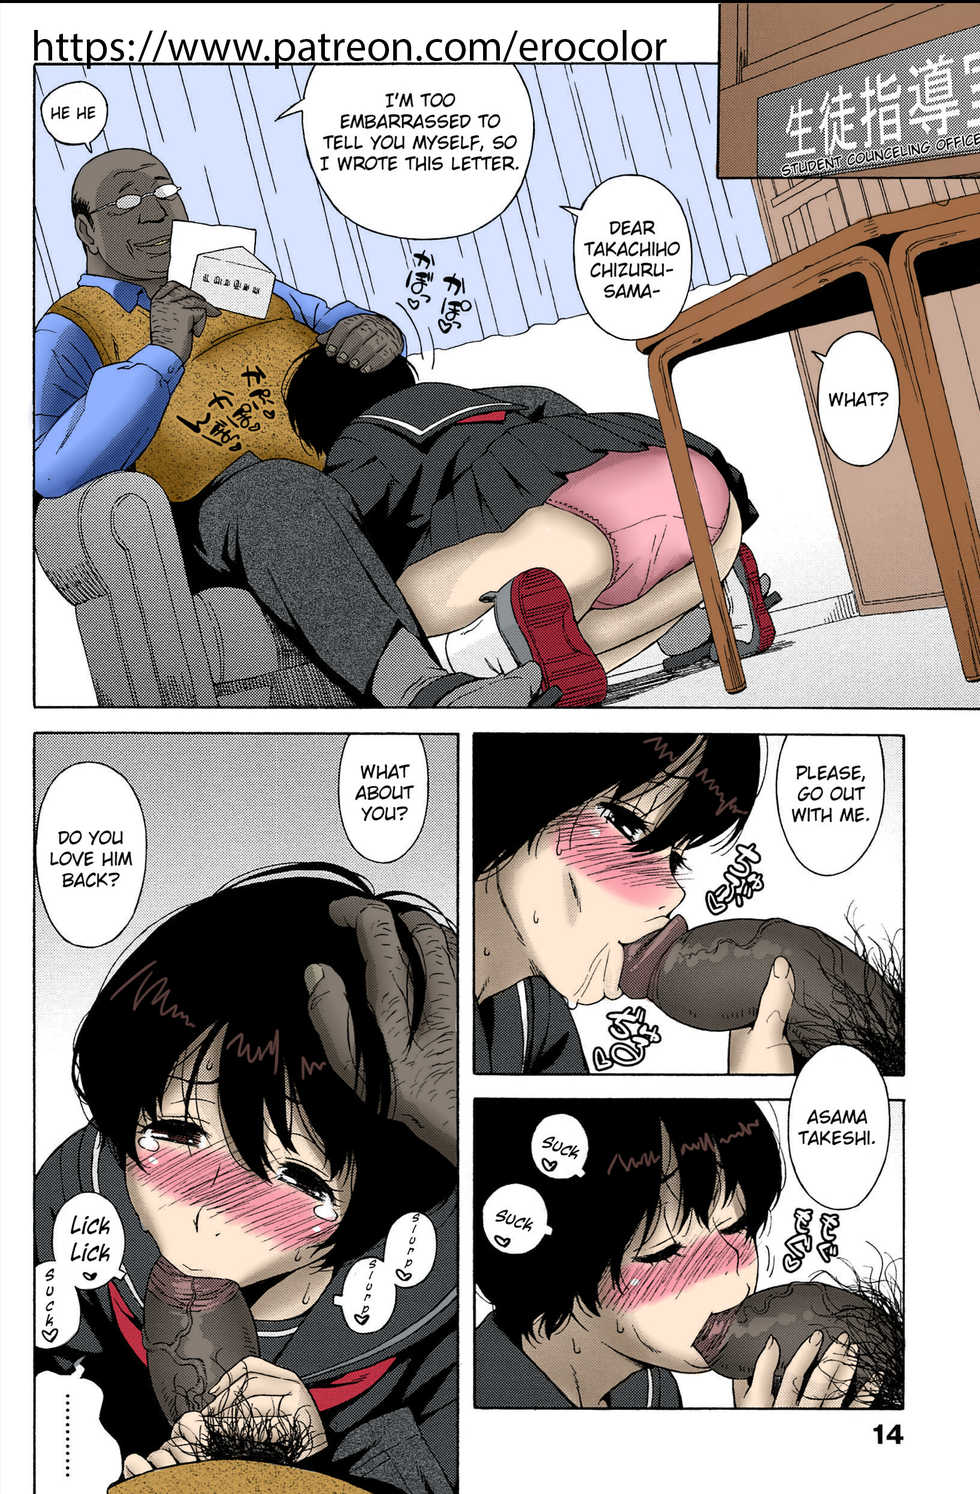 [Jingrock] Love Letter [English] [Erocolor] [Colorized] [chapter1] - Page 9